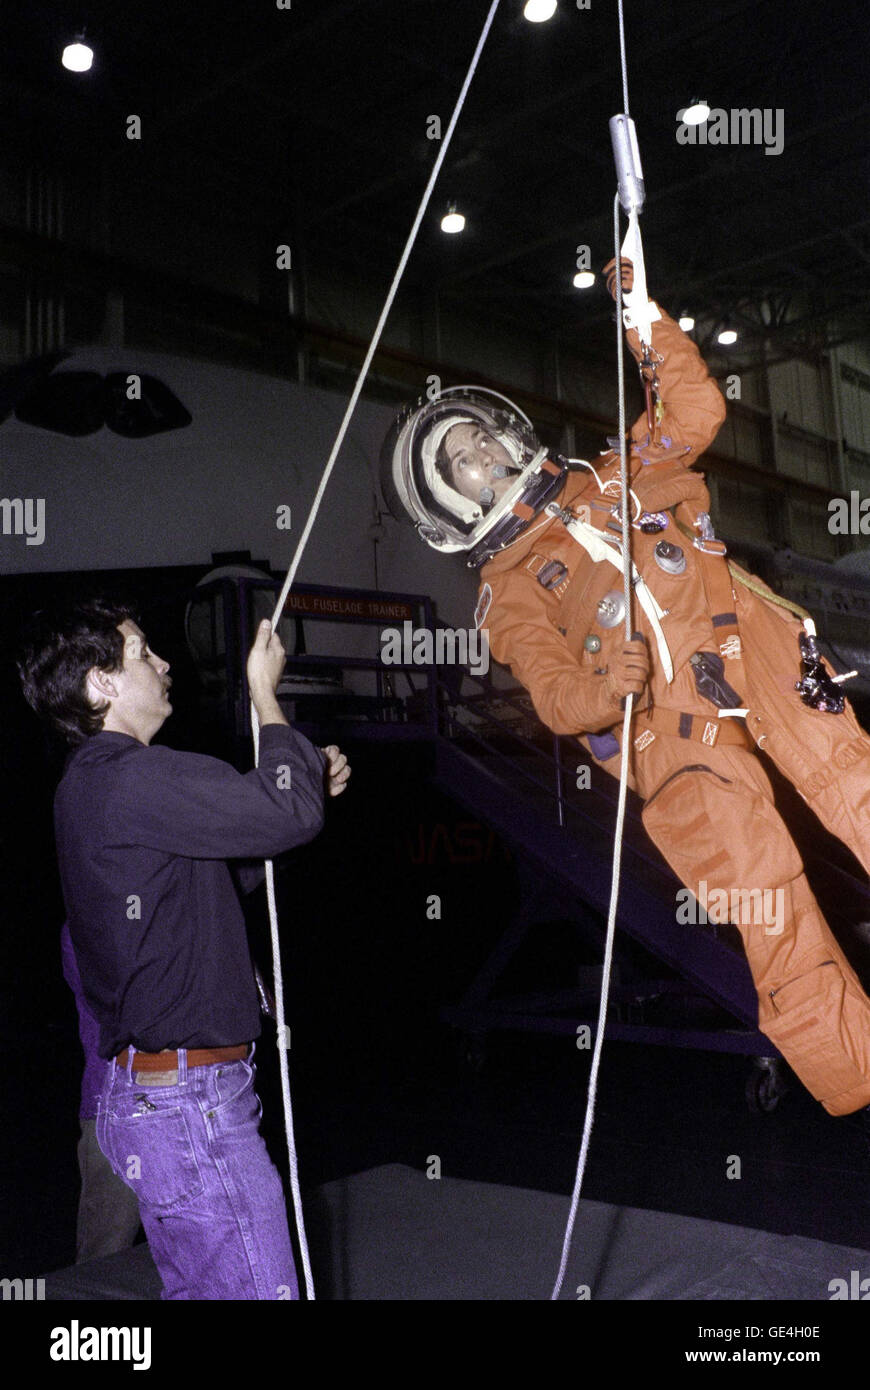 (December 1, 1992) Mission Specialist Ellen Ochoa, wearing a Launch and Entry Suit (LES) and Launch and Entry Helmet (LEH), simulates an emergency egress procedure at JSC's Mockup and Integration Laboratory (MAIL). Having exited the crew compartment trainer (CCT) a shuttle mockup, through an overhead aft flight deck window; Ochoa lowers herself to the ground using the sky-genie. Training instructor Kenneth D. Trujillo assumes the role of a crewmate assisting from a position on the ground. The sky-genie is carried on all Space Shuttle flights for emergency egress purposes.   Image # : S92-51716 Stock Photo